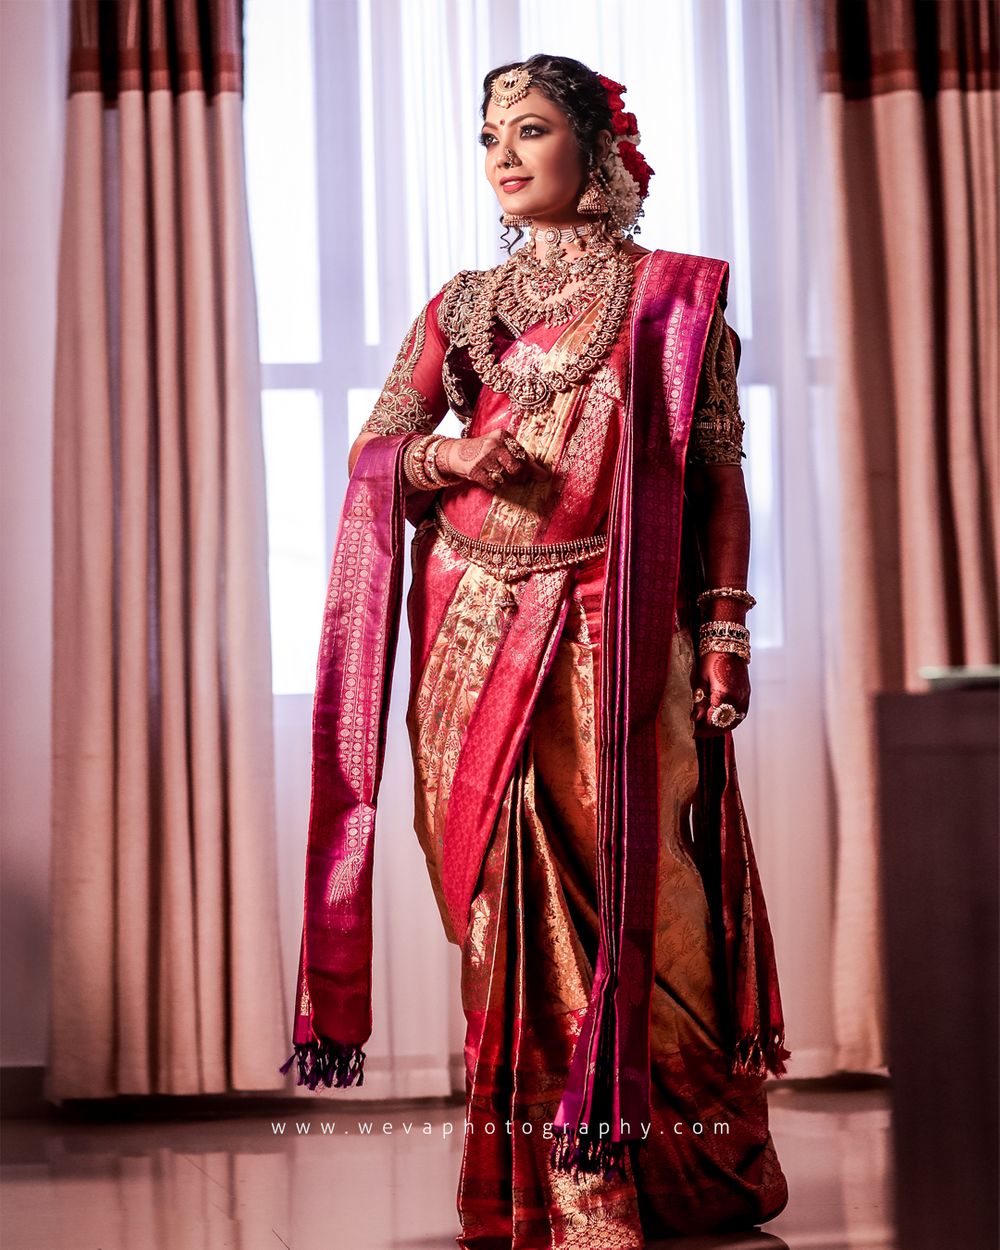 Photo of A south indian bride in red kanjeevaram and temple jewellery